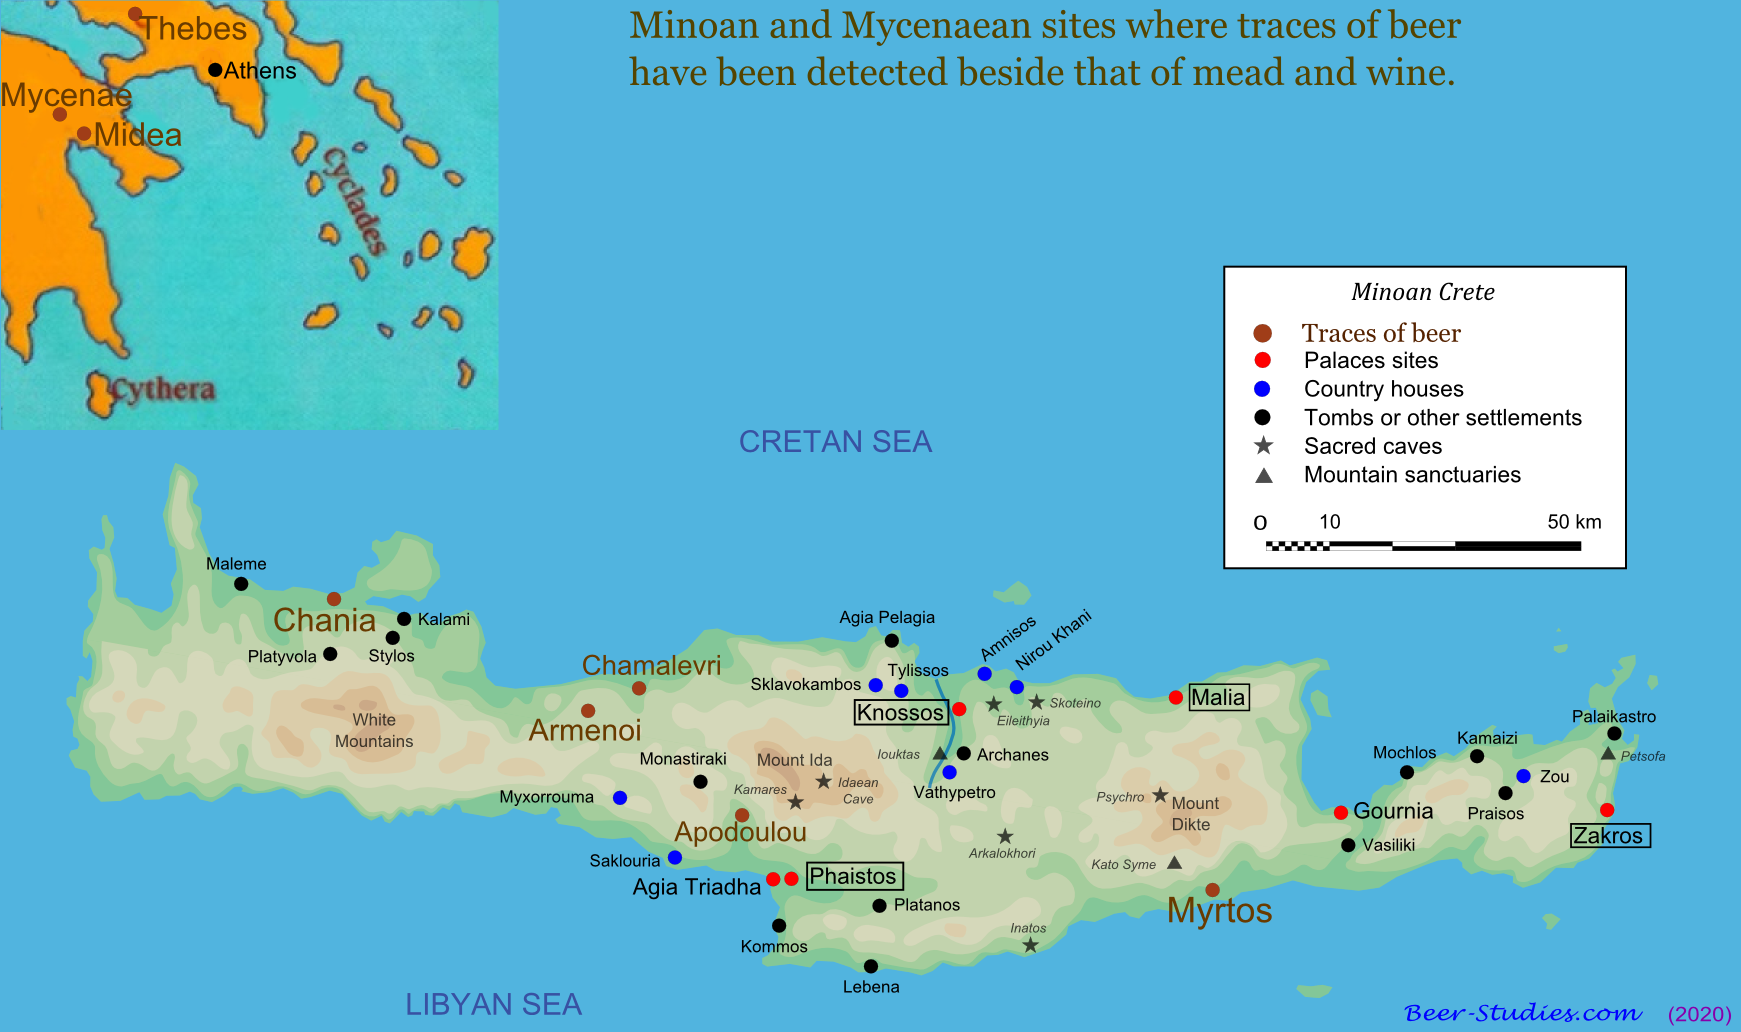 Minoan and Mycenaean sites where traces of beer have been detected